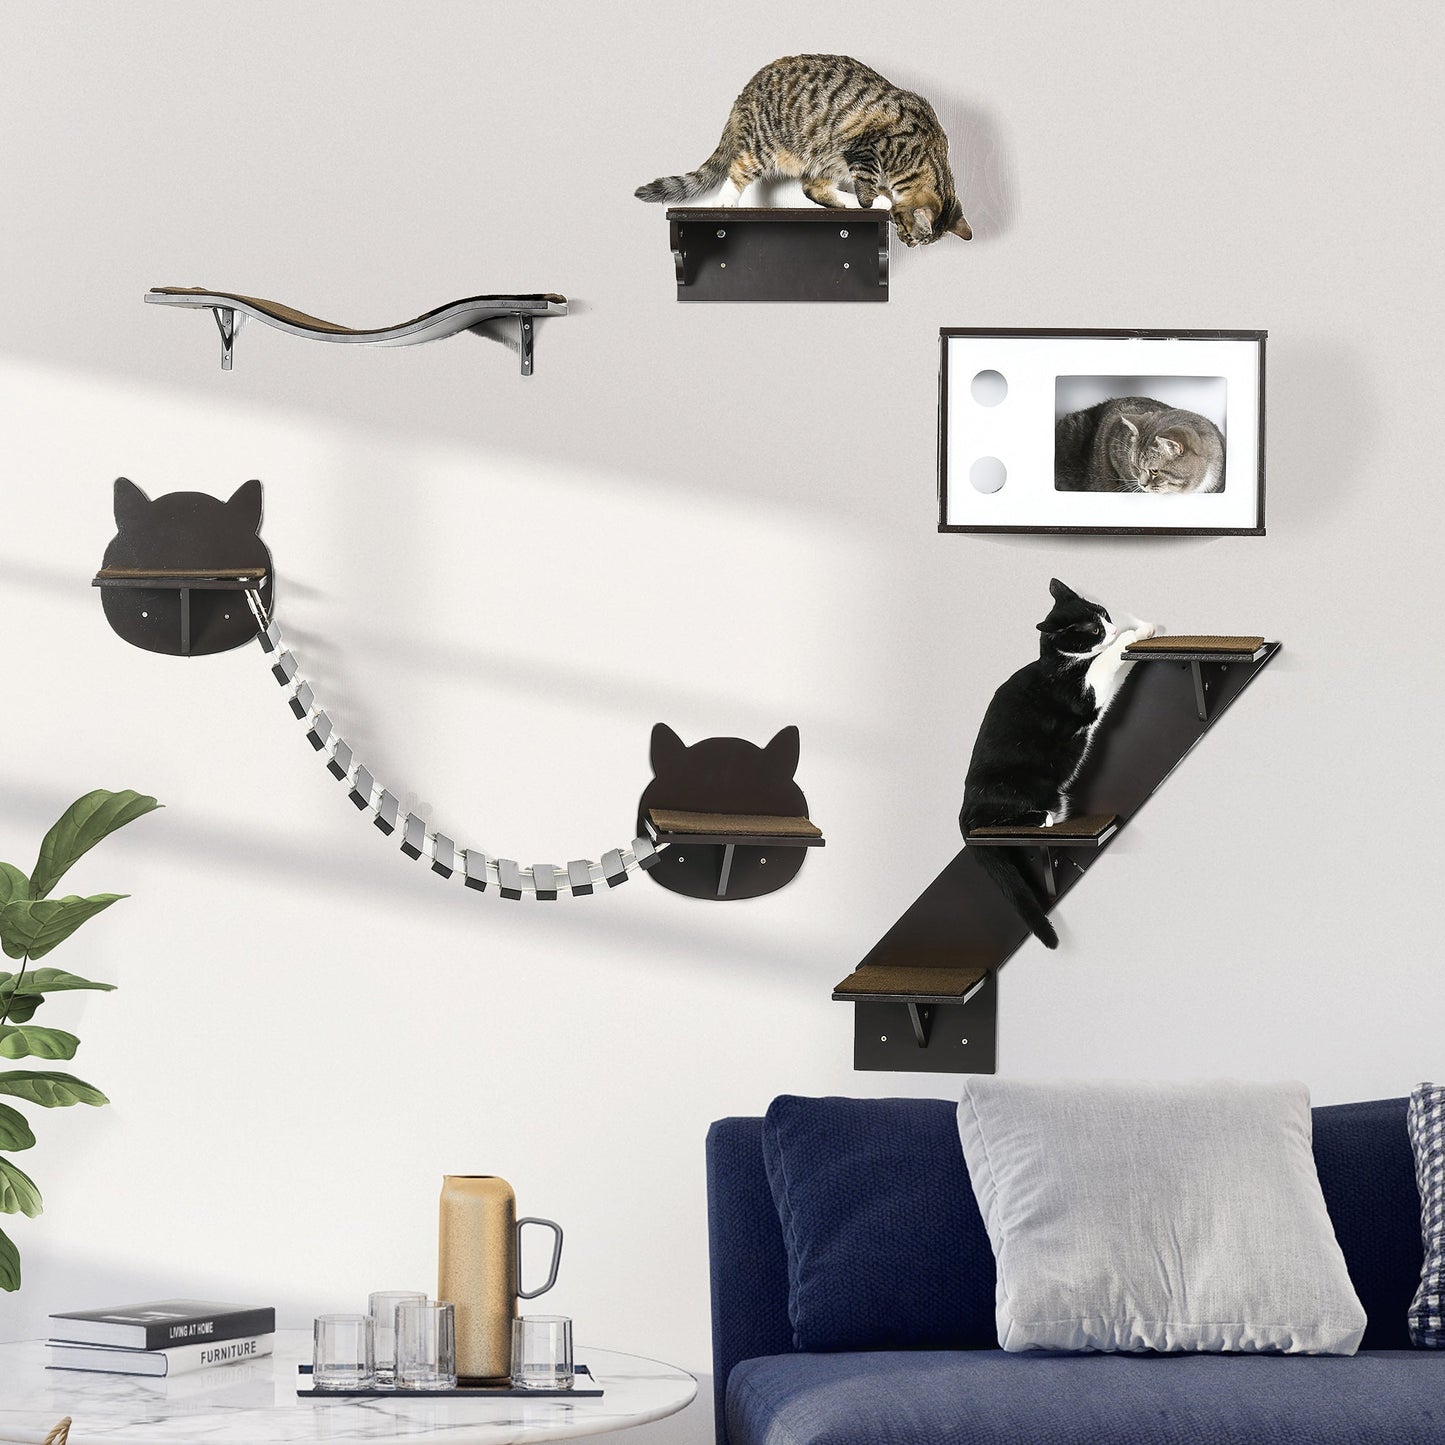 -PawHut 5PCs Cat Wall Shelves, Cat Wall-mounted Shelf Set with Cushion Condo Jumping Platform Ladder Brown - Outdoor Style Company